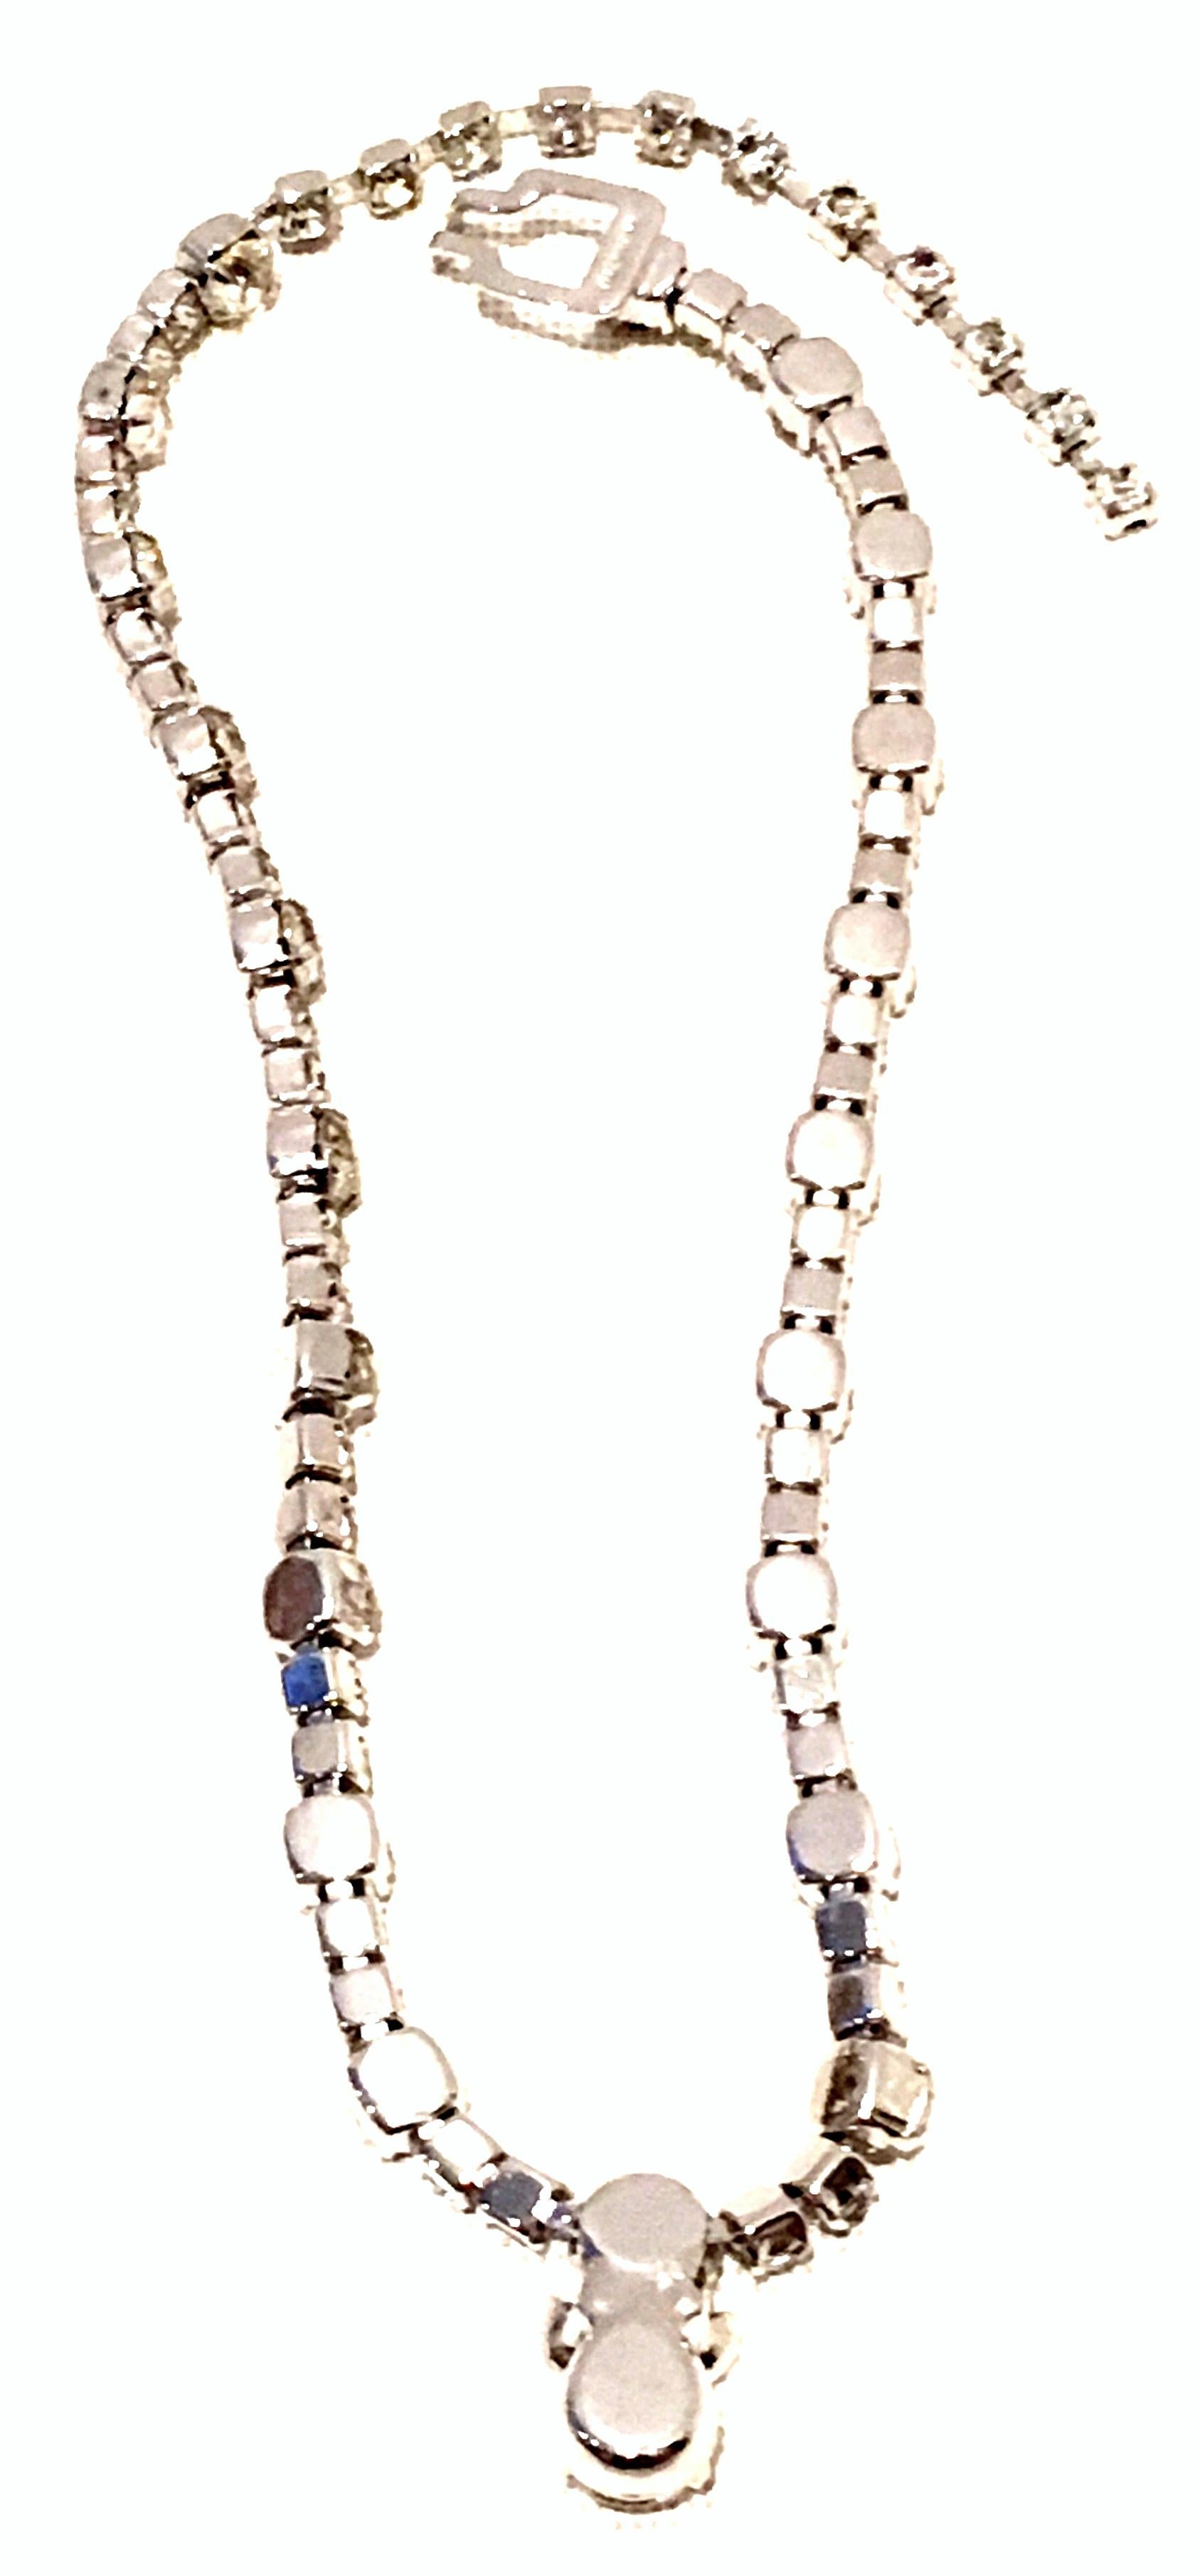 20th Century Silver & Swarovski Crystal Choker Style Necklace By, Eisenberg For Sale 6